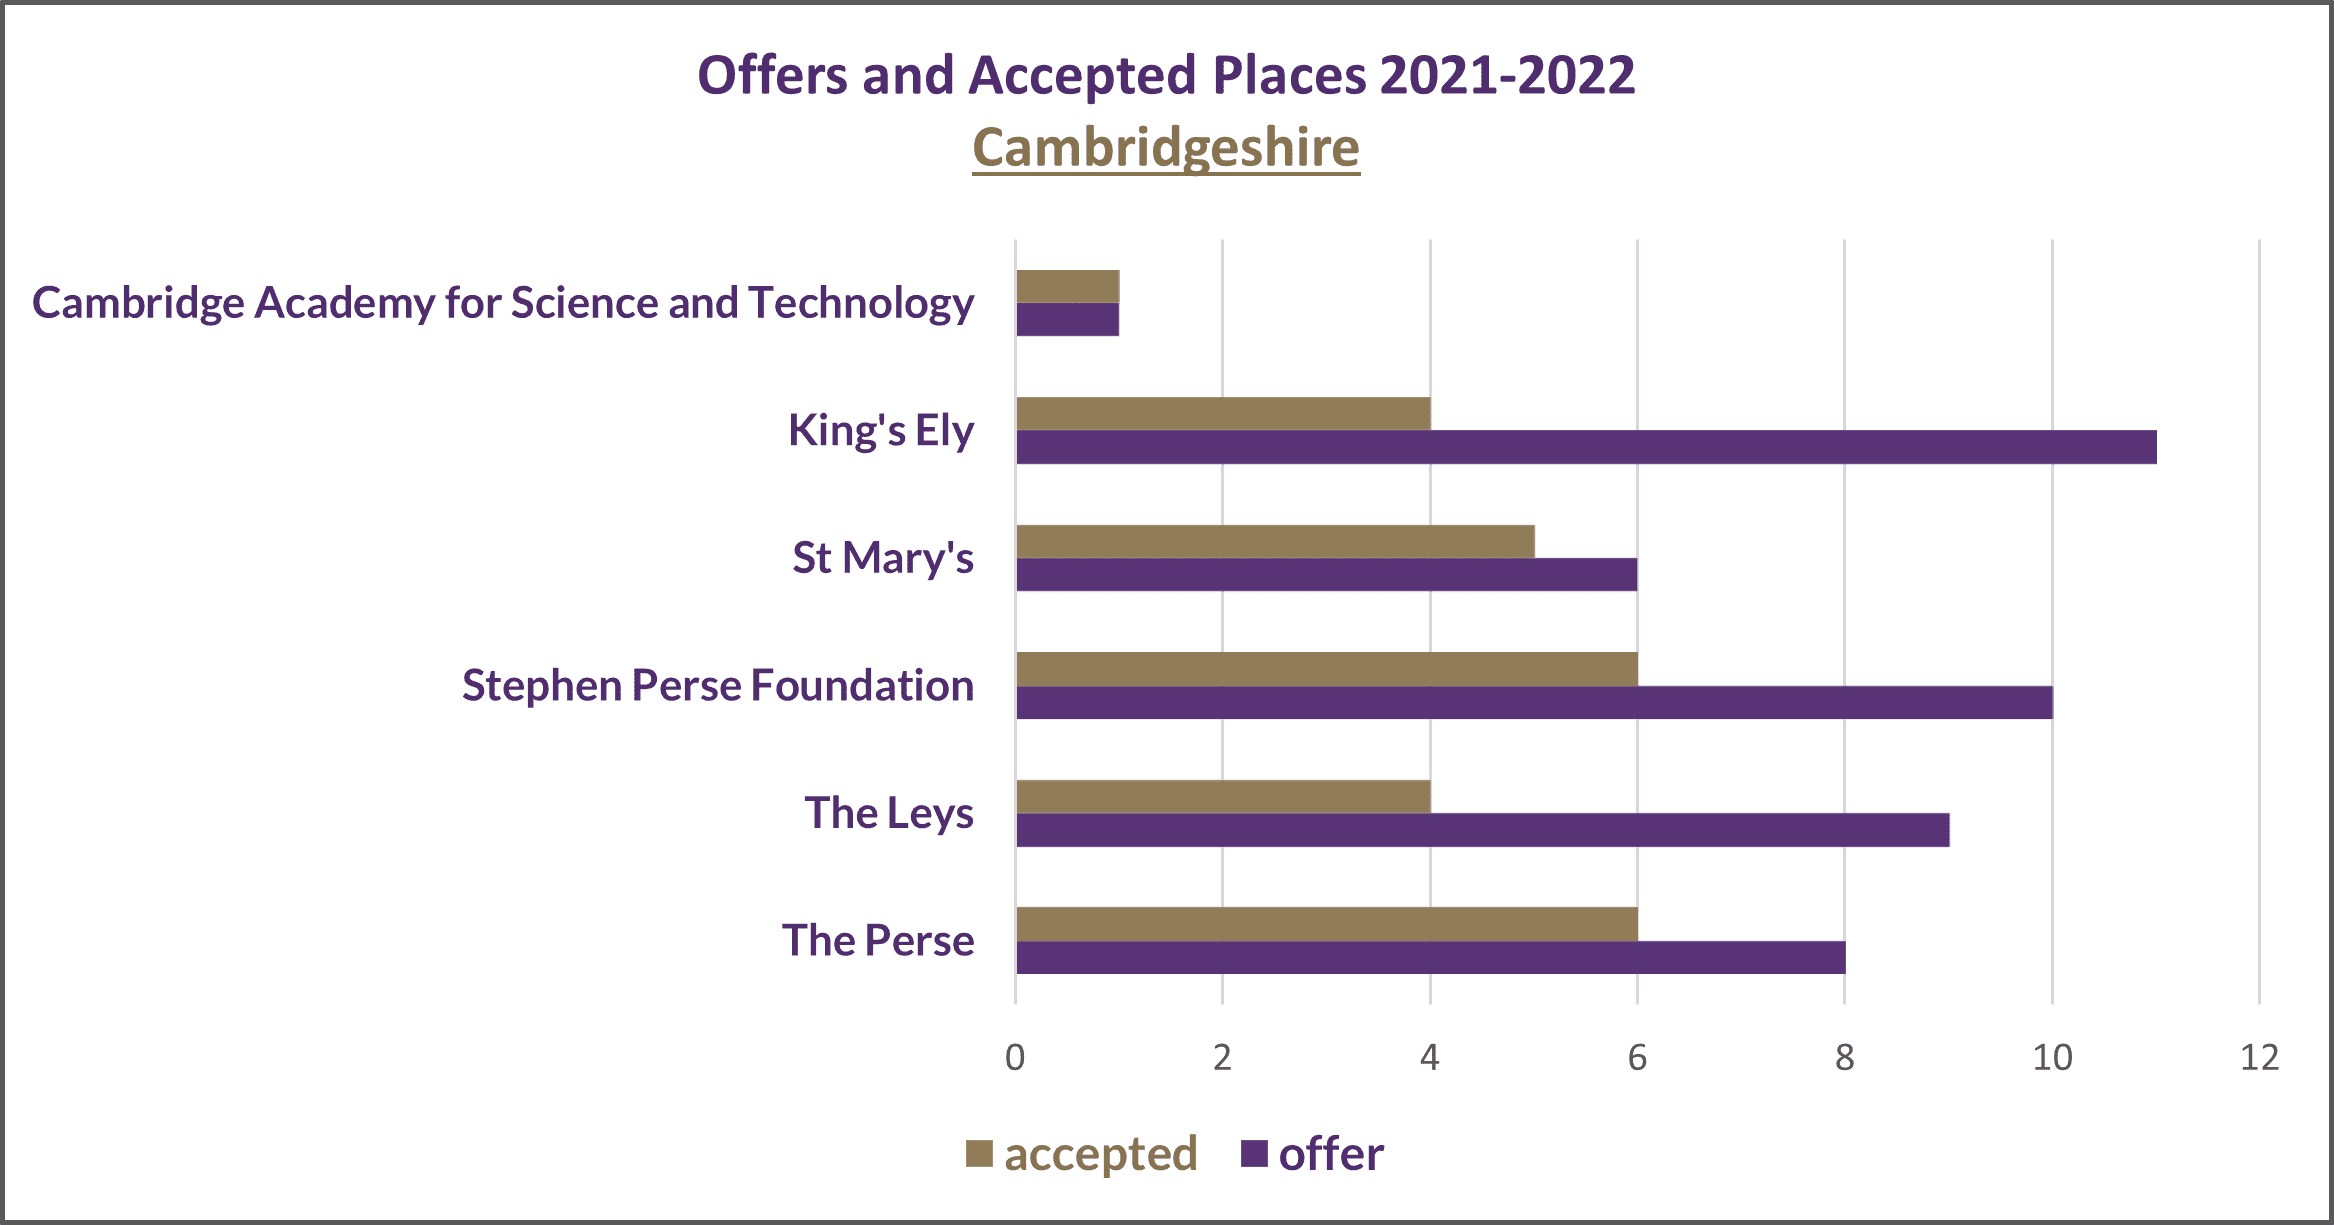 Offers and accepted places 2021-2022